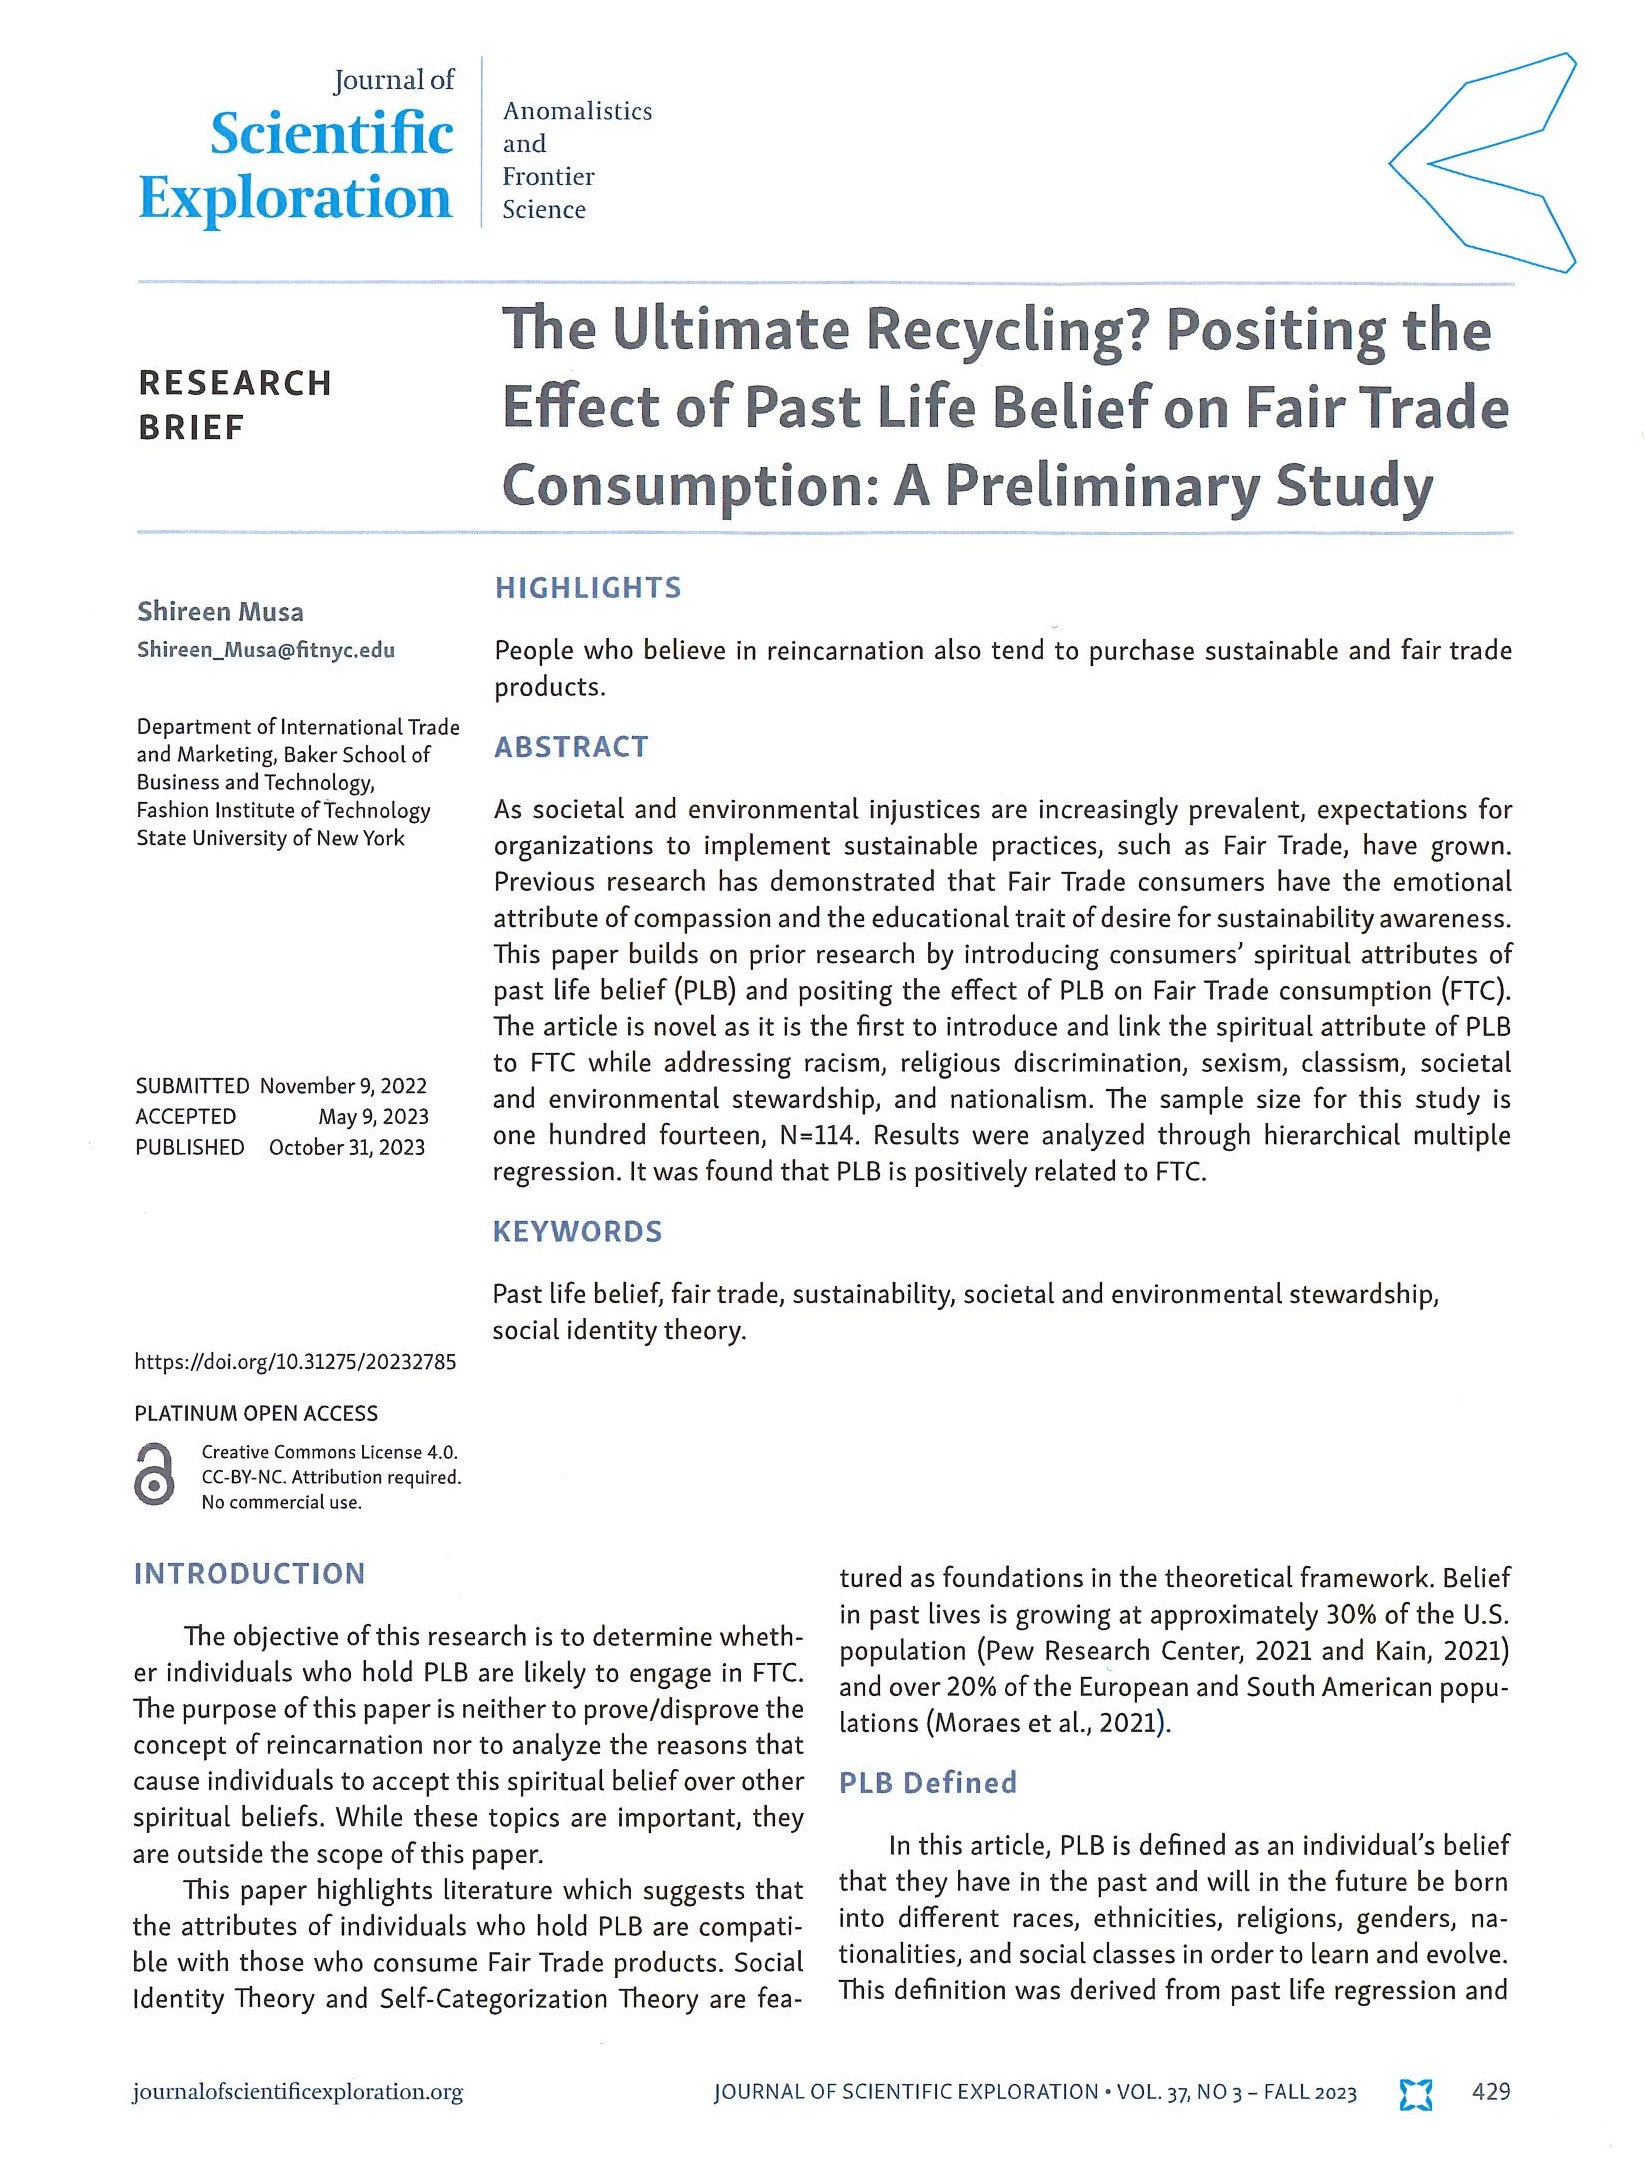 This is the first page of the article titled The Ultimate Recycling? Positing the Effect of Past Life Belief on Fair Trade Consumption – A Preliminary Study. 